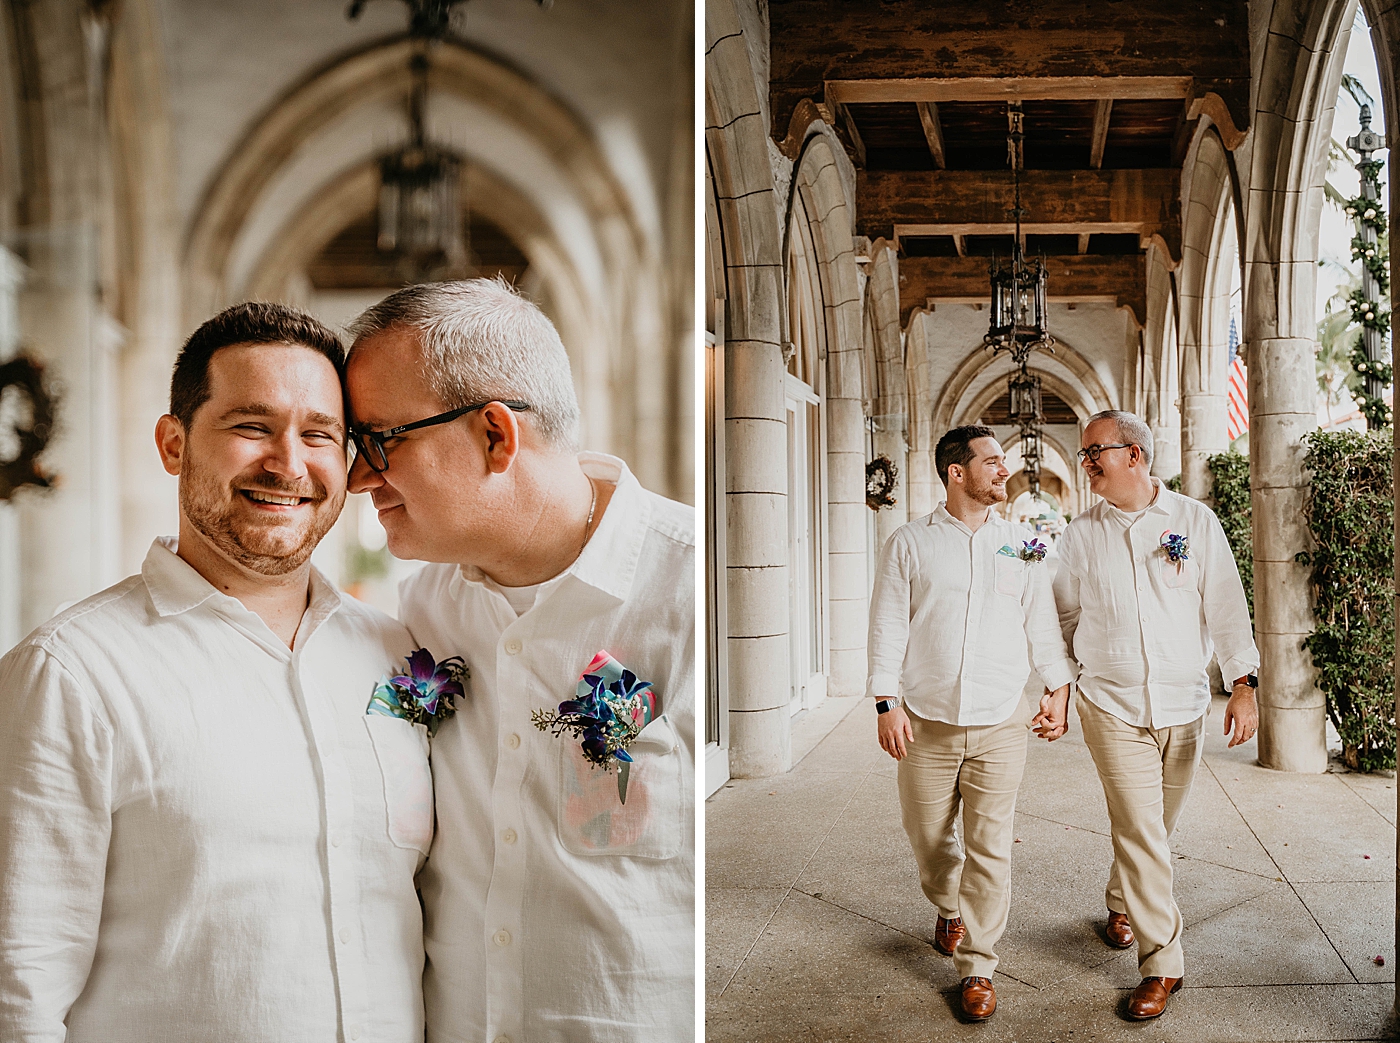 Couple nuzzling and holding hands down breezeway Palm Beach Elopement Photography captured by South Florida Photographer Krystal Capone Photography 